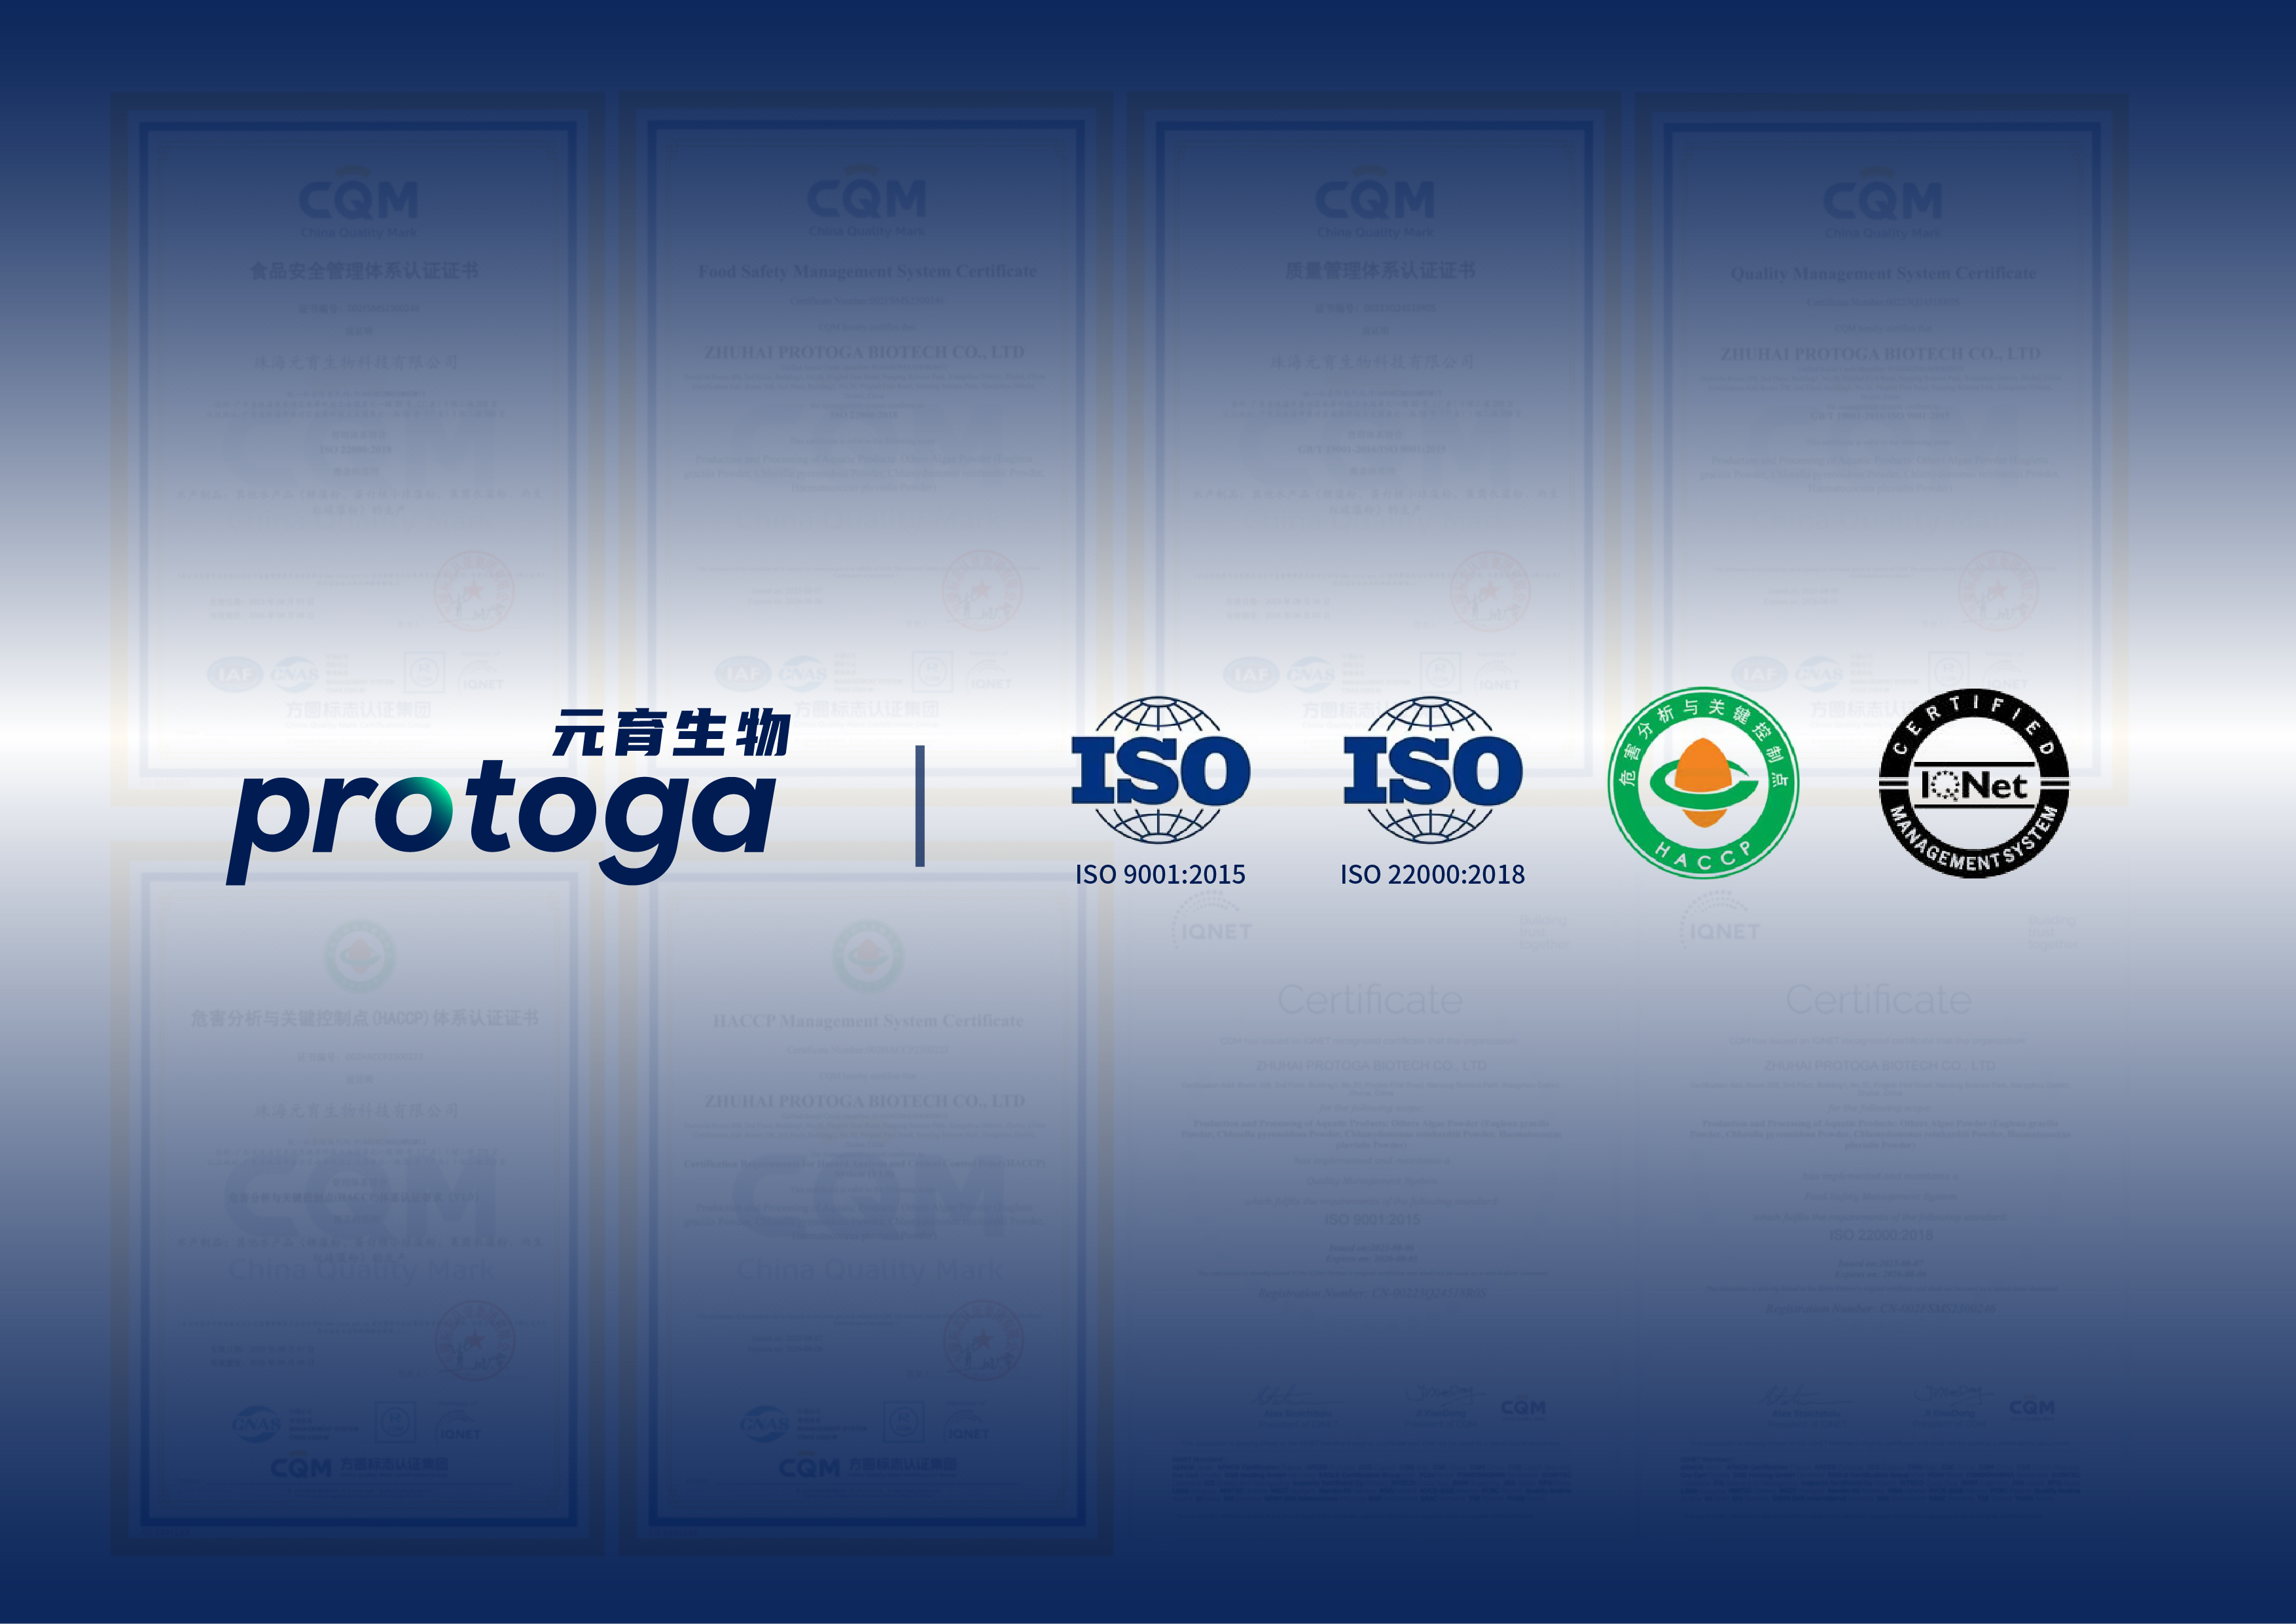 PROTOGA Biotech successfully passed the ISO9001, ISO22000, HACCP three international certifications